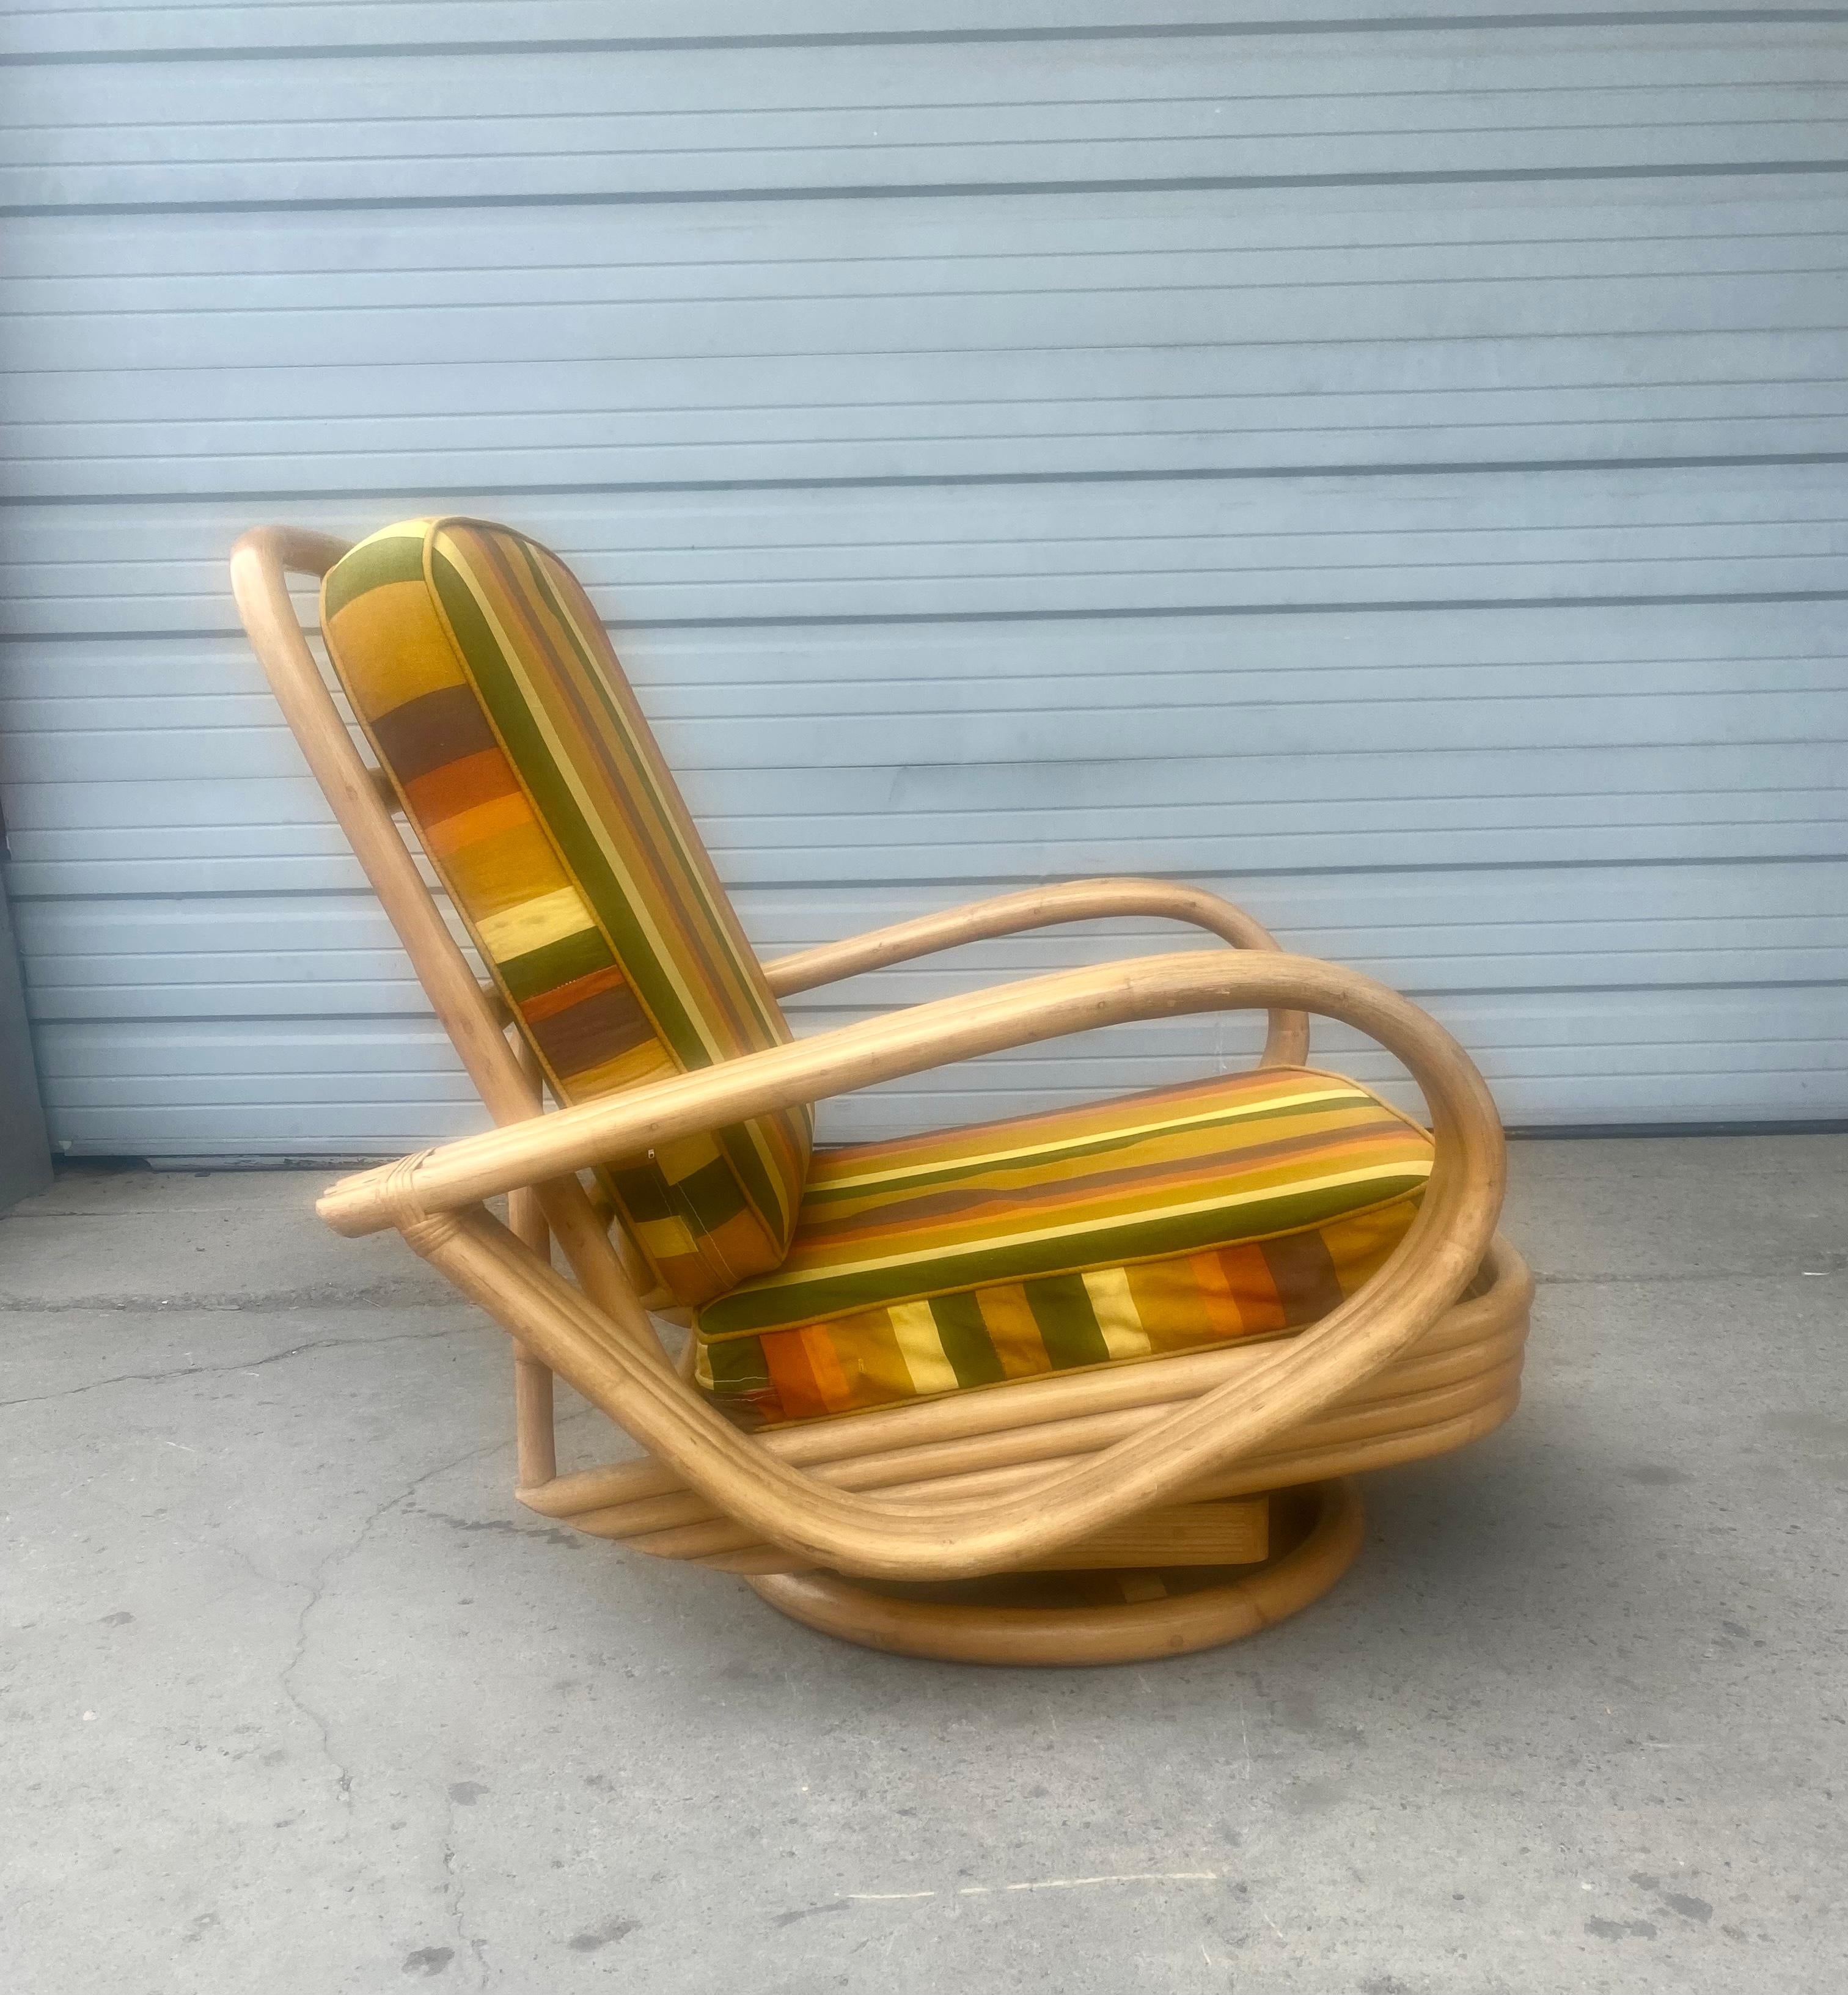 Art Deco / streamline bamboo Tilt/ Swivel platform rocker, tear drop arm. Triple banded bamboo very reminiscent of famed designs by Paul Frankl. Amazing original condition, patina, surface. Extremely comfortable, retains original seat and back